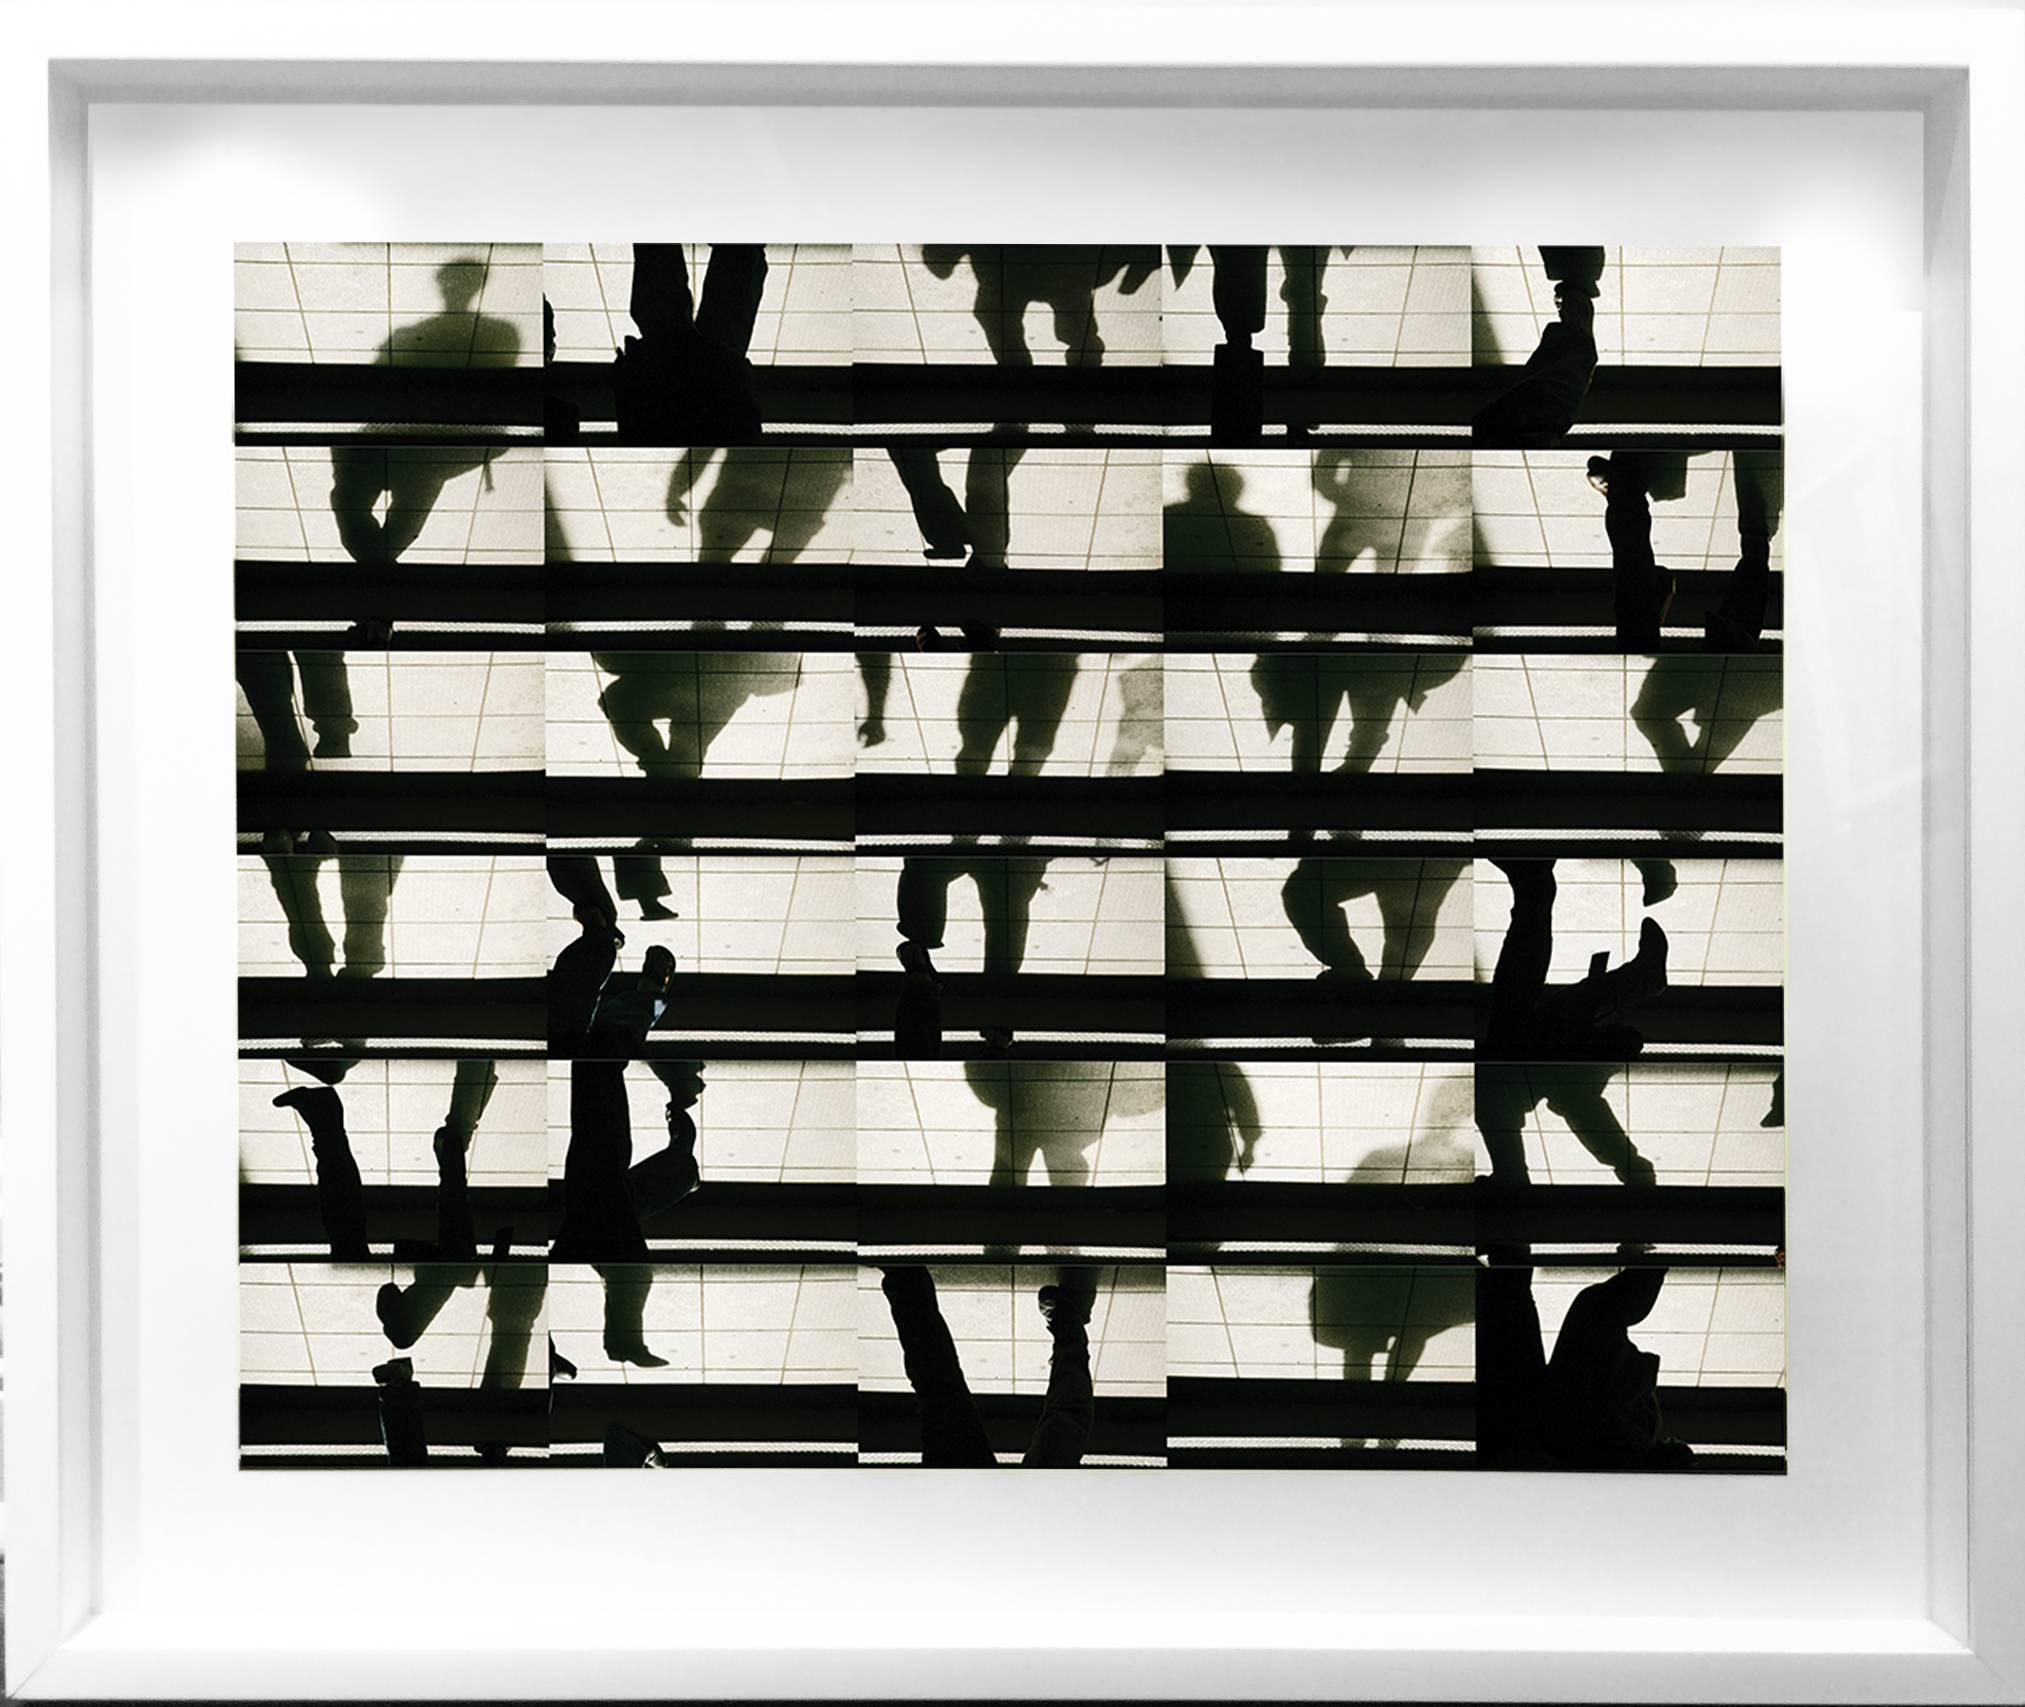 archival chromogenic digital print
framed size: 25.5 x 30 inches
White wood moulding, non reflective glass

Elliott Kaufman describes New York City as a laboratory in constant movement. In his series “Street Dance,” Kaufman photographs repetitive